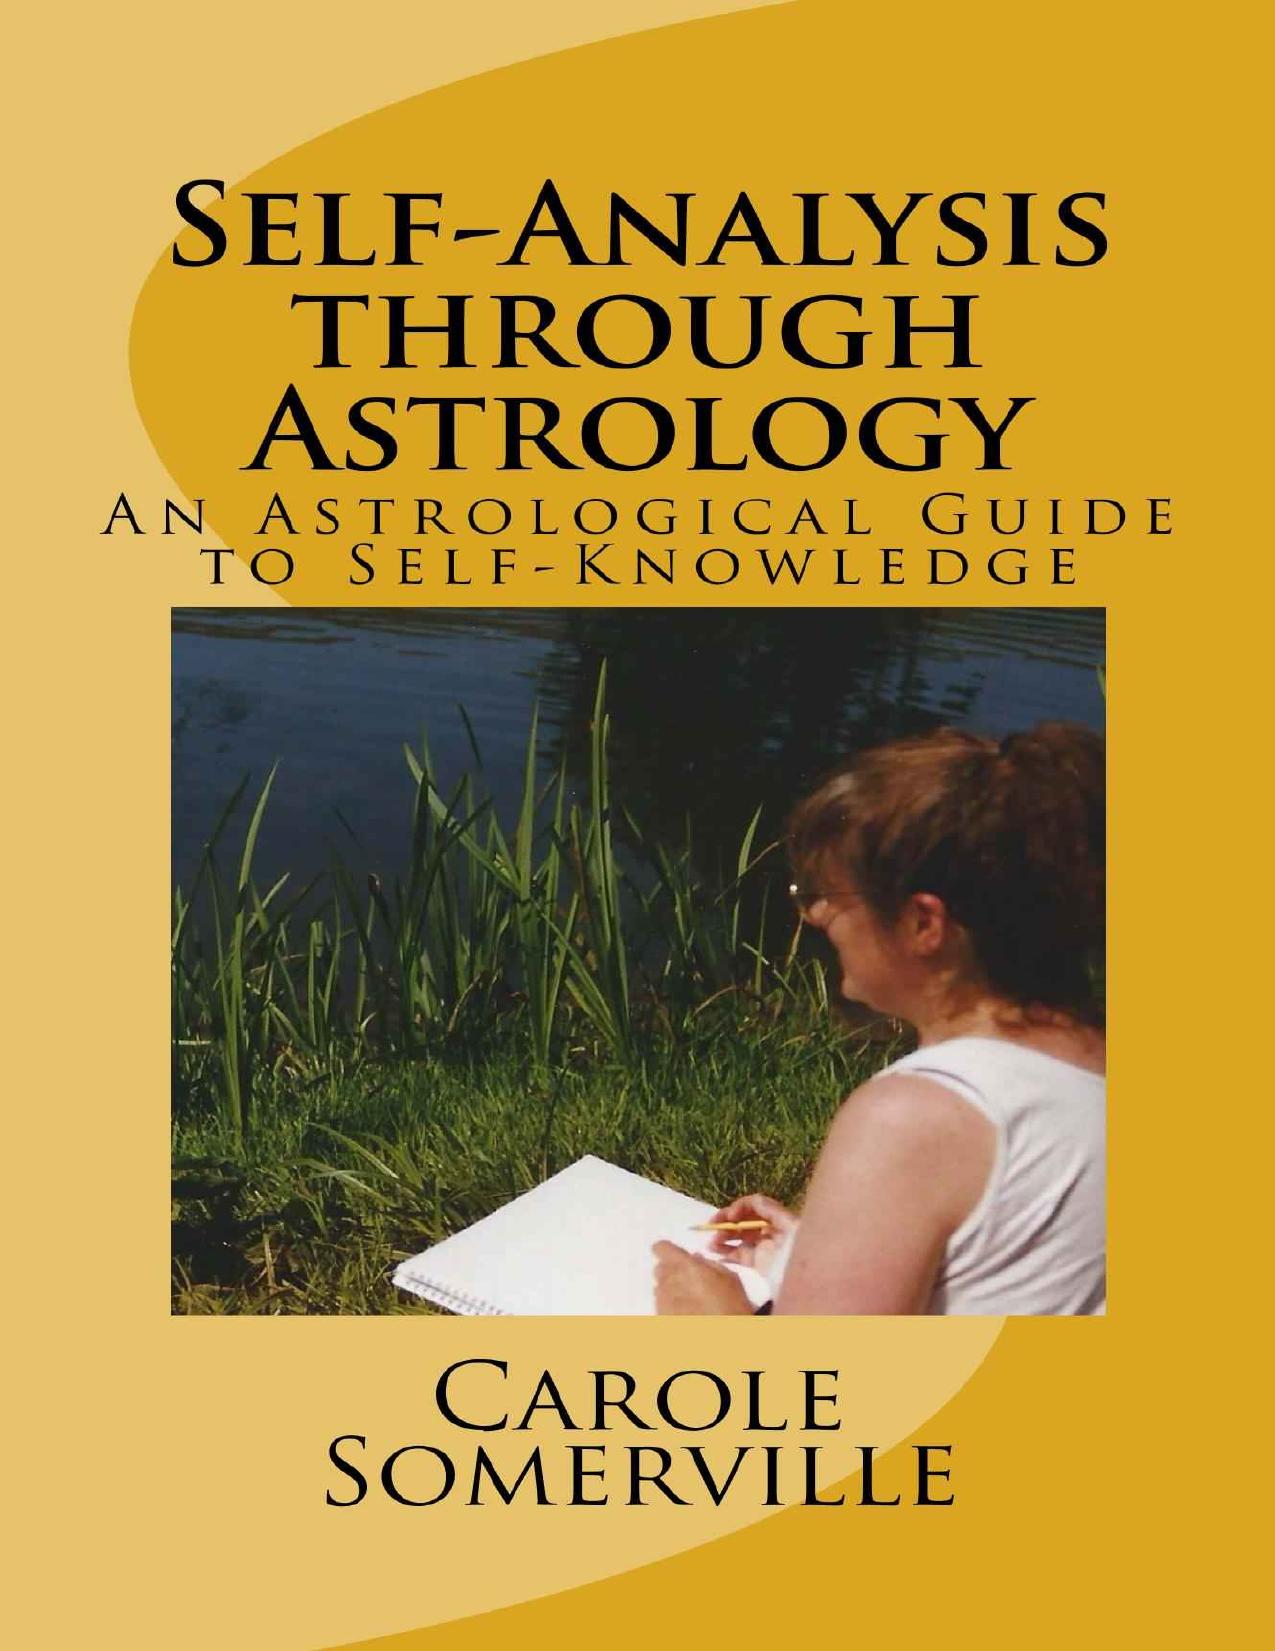 Self-Analysis Through Astrology: An Astrological Guide to Self-Knowledge